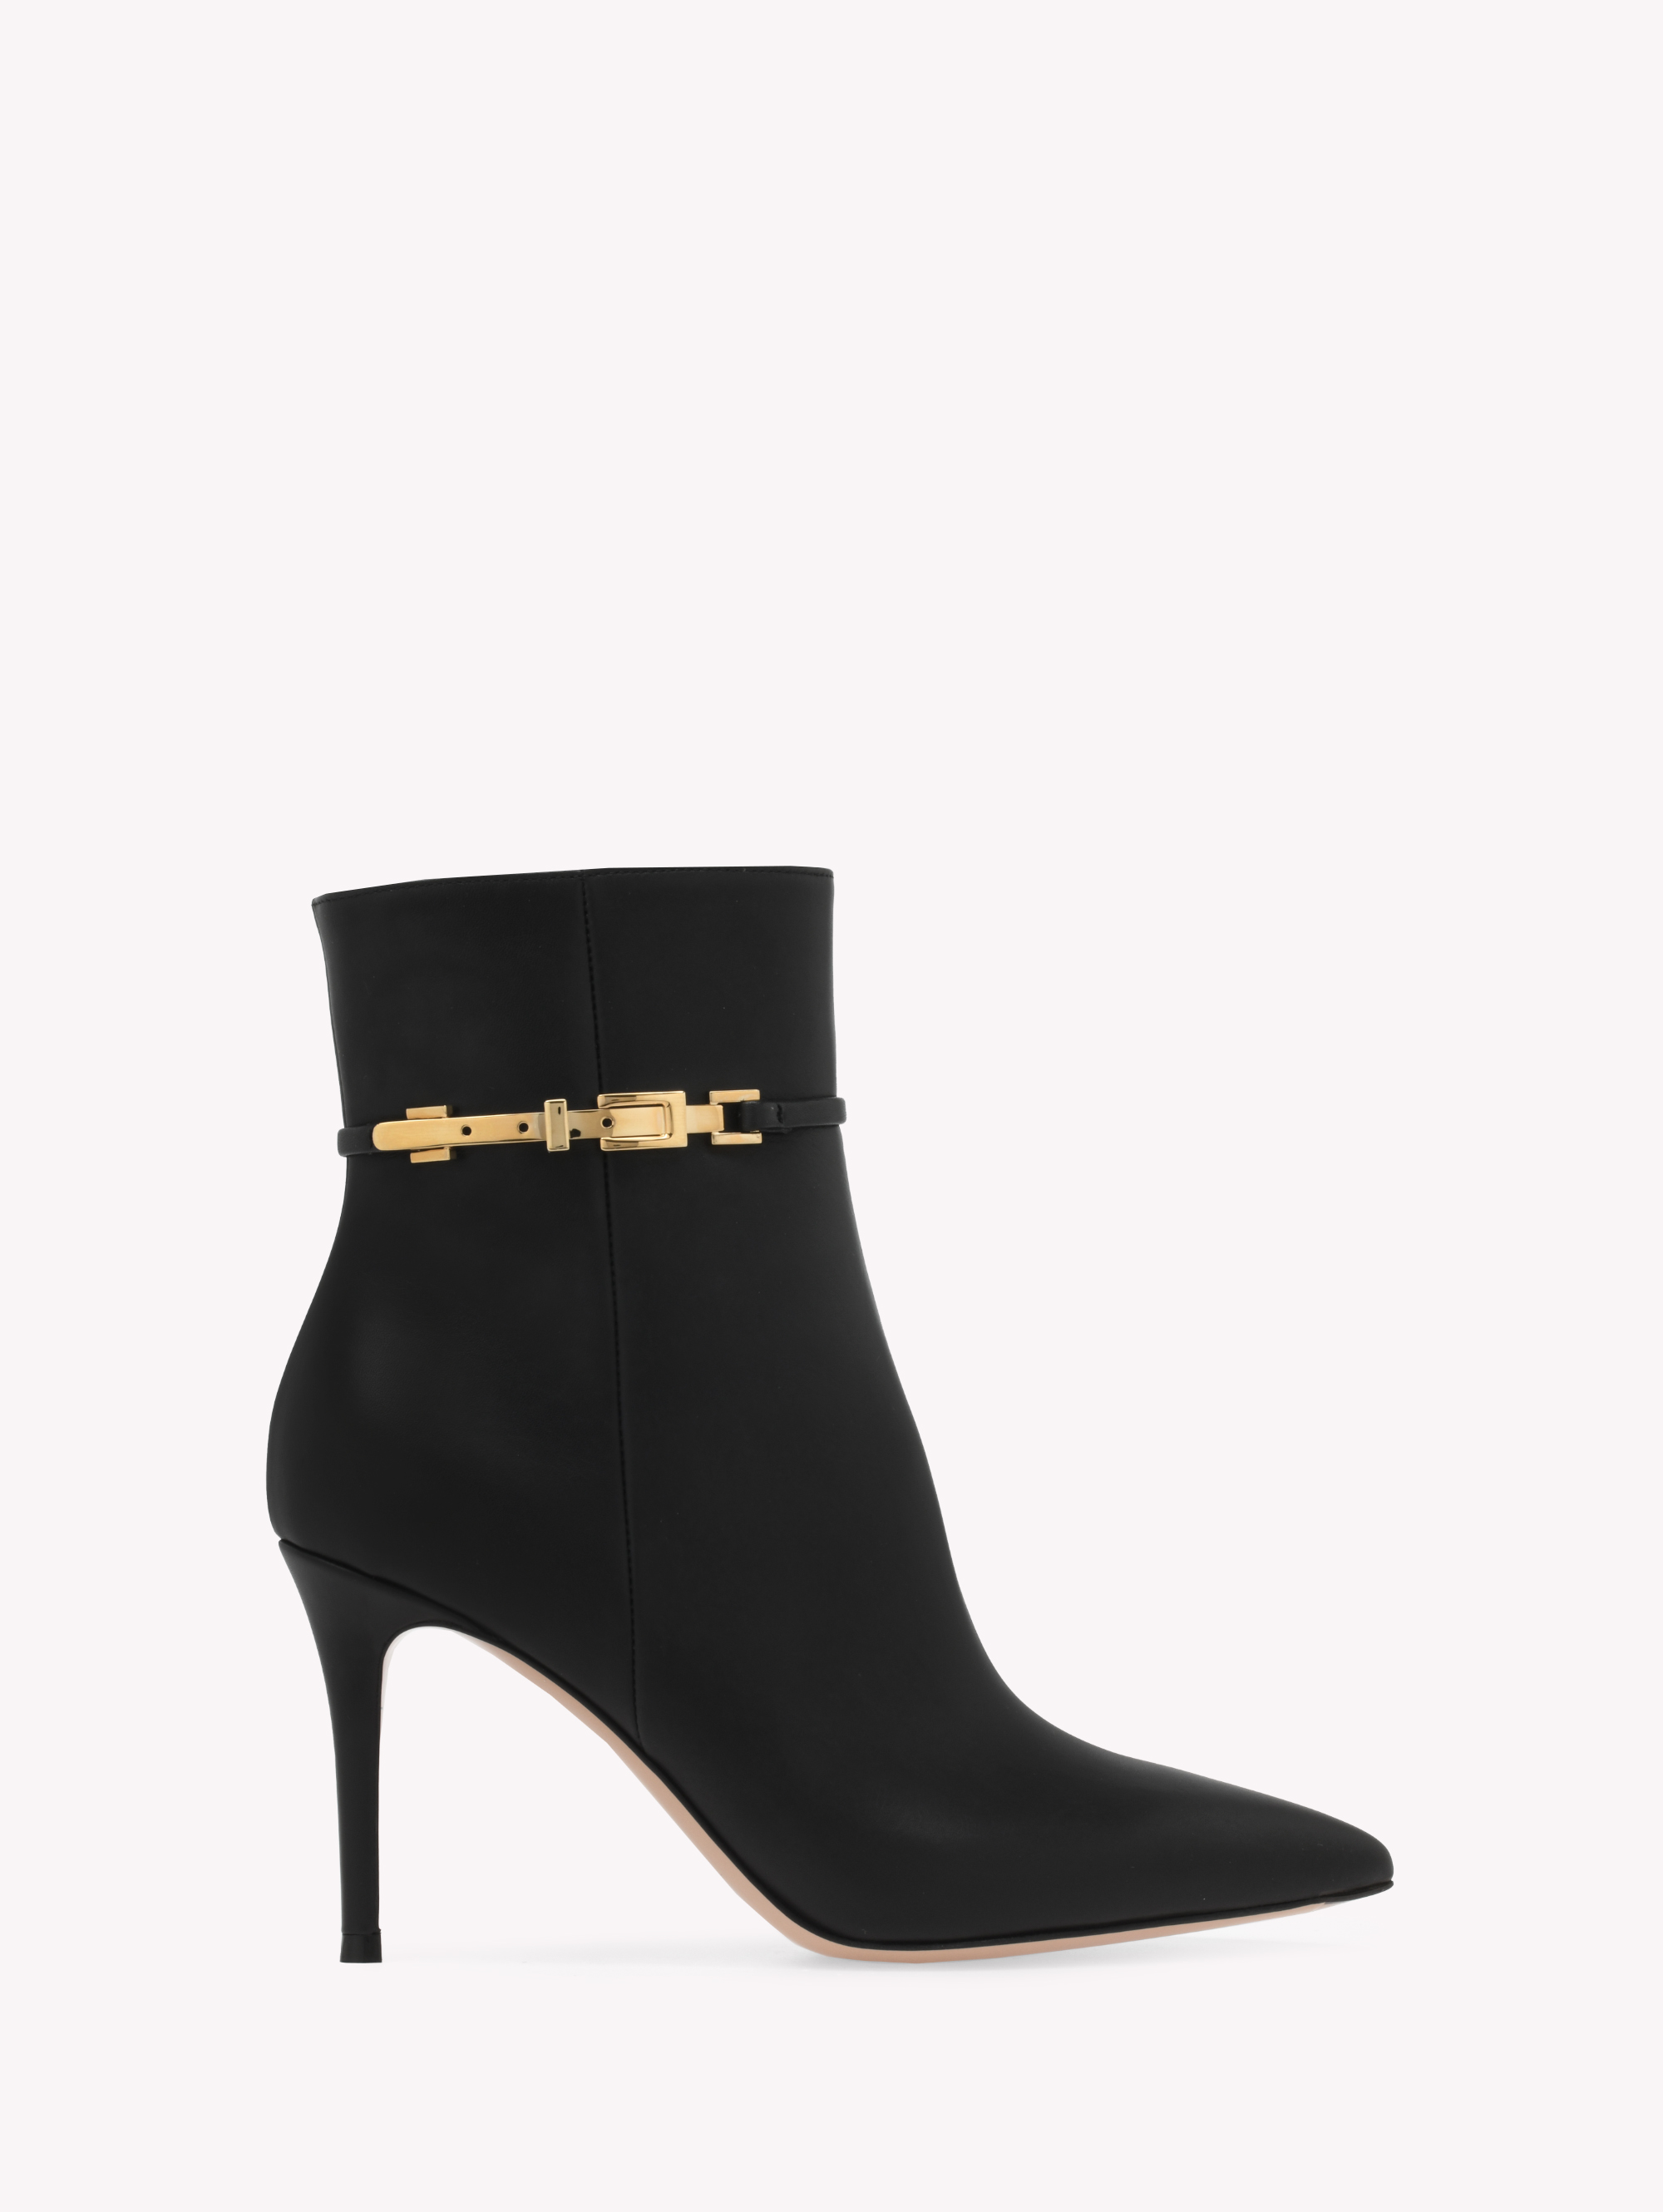 Shop Gianvito Rossi Carrey Bootie 85 In Black Leather